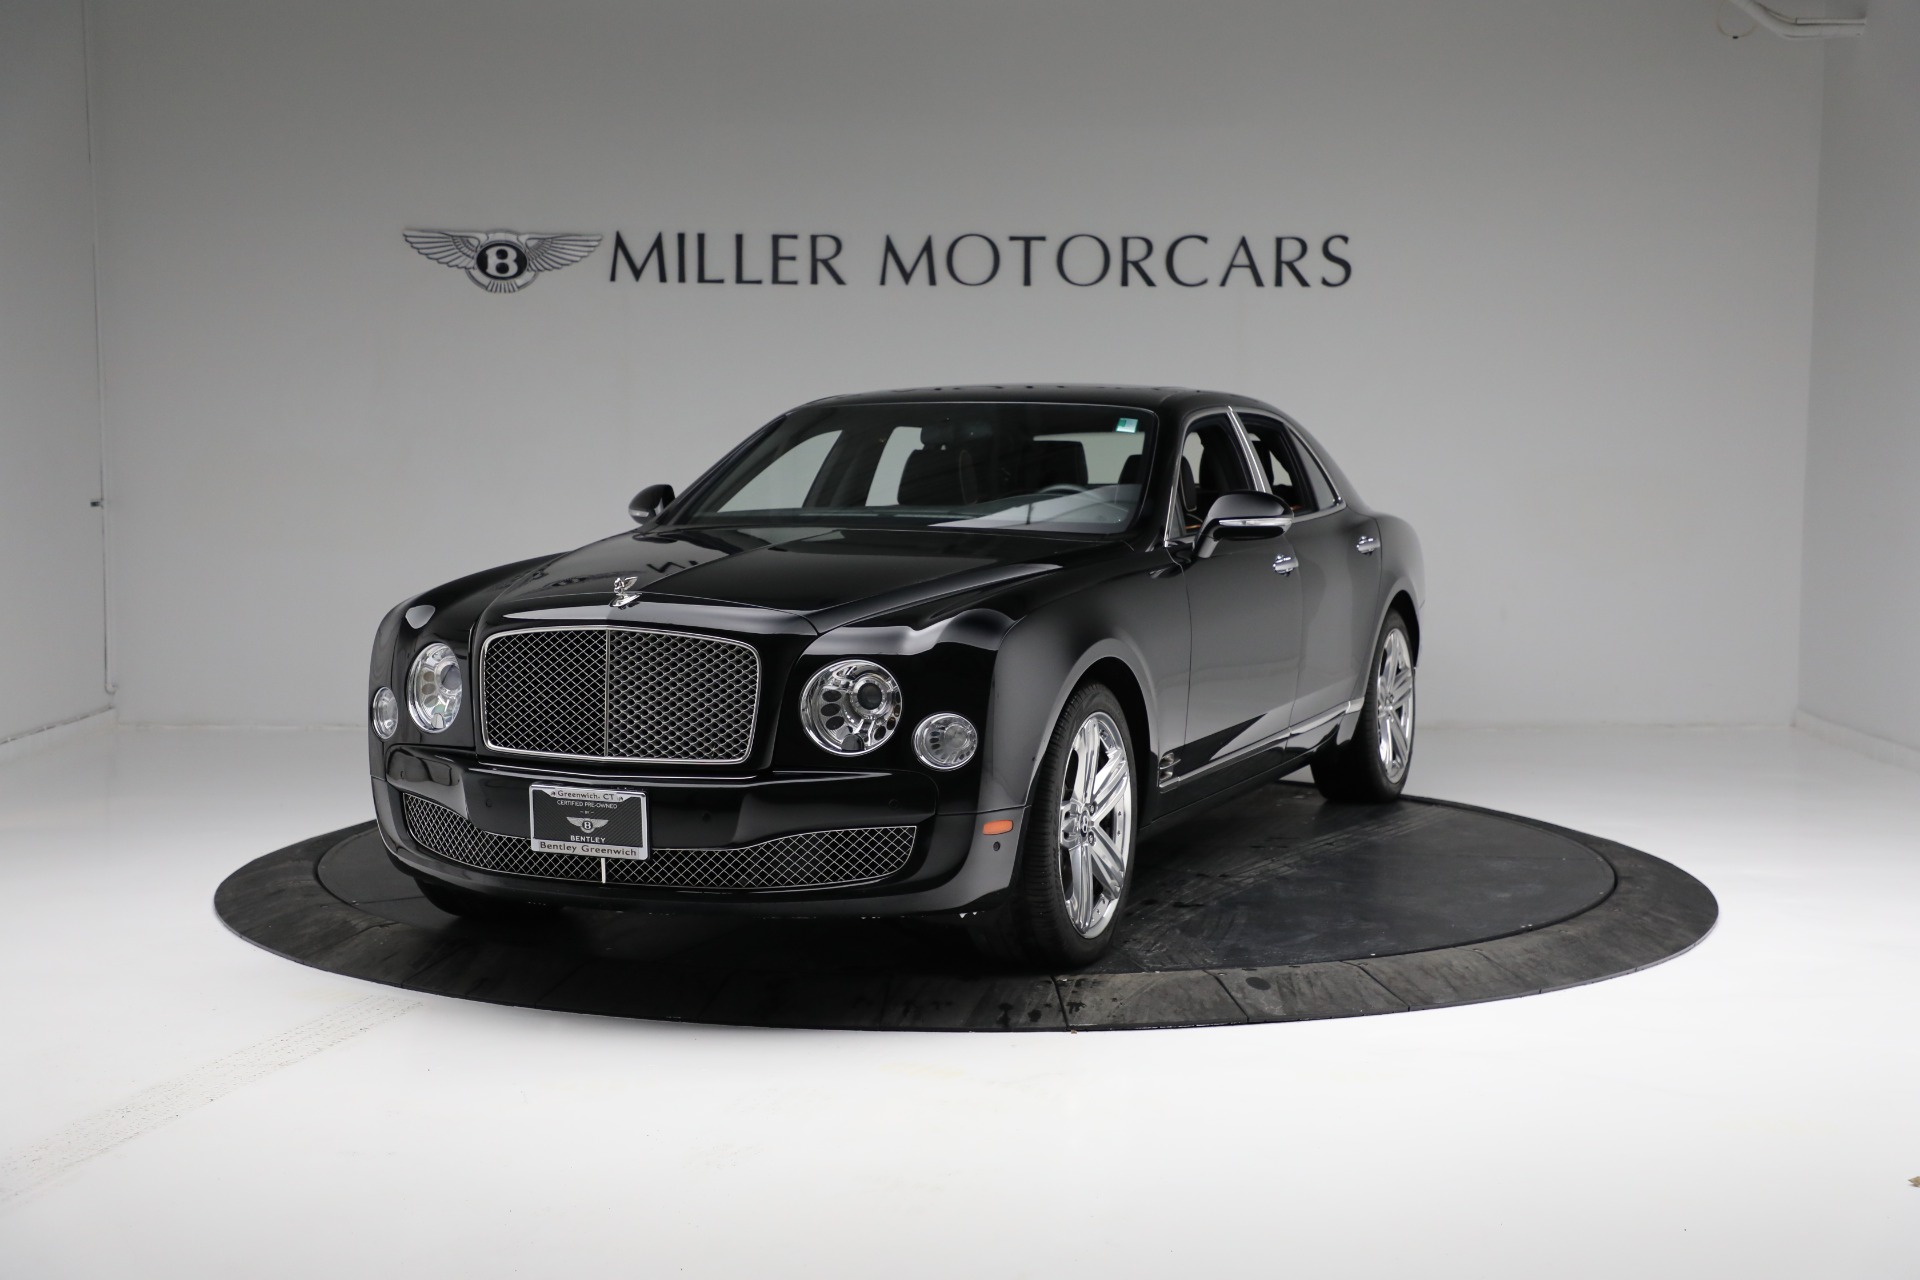 Used 2013 Bentley Mulsanne for sale Sold at Bugatti of Greenwich in Greenwich CT 06830 1